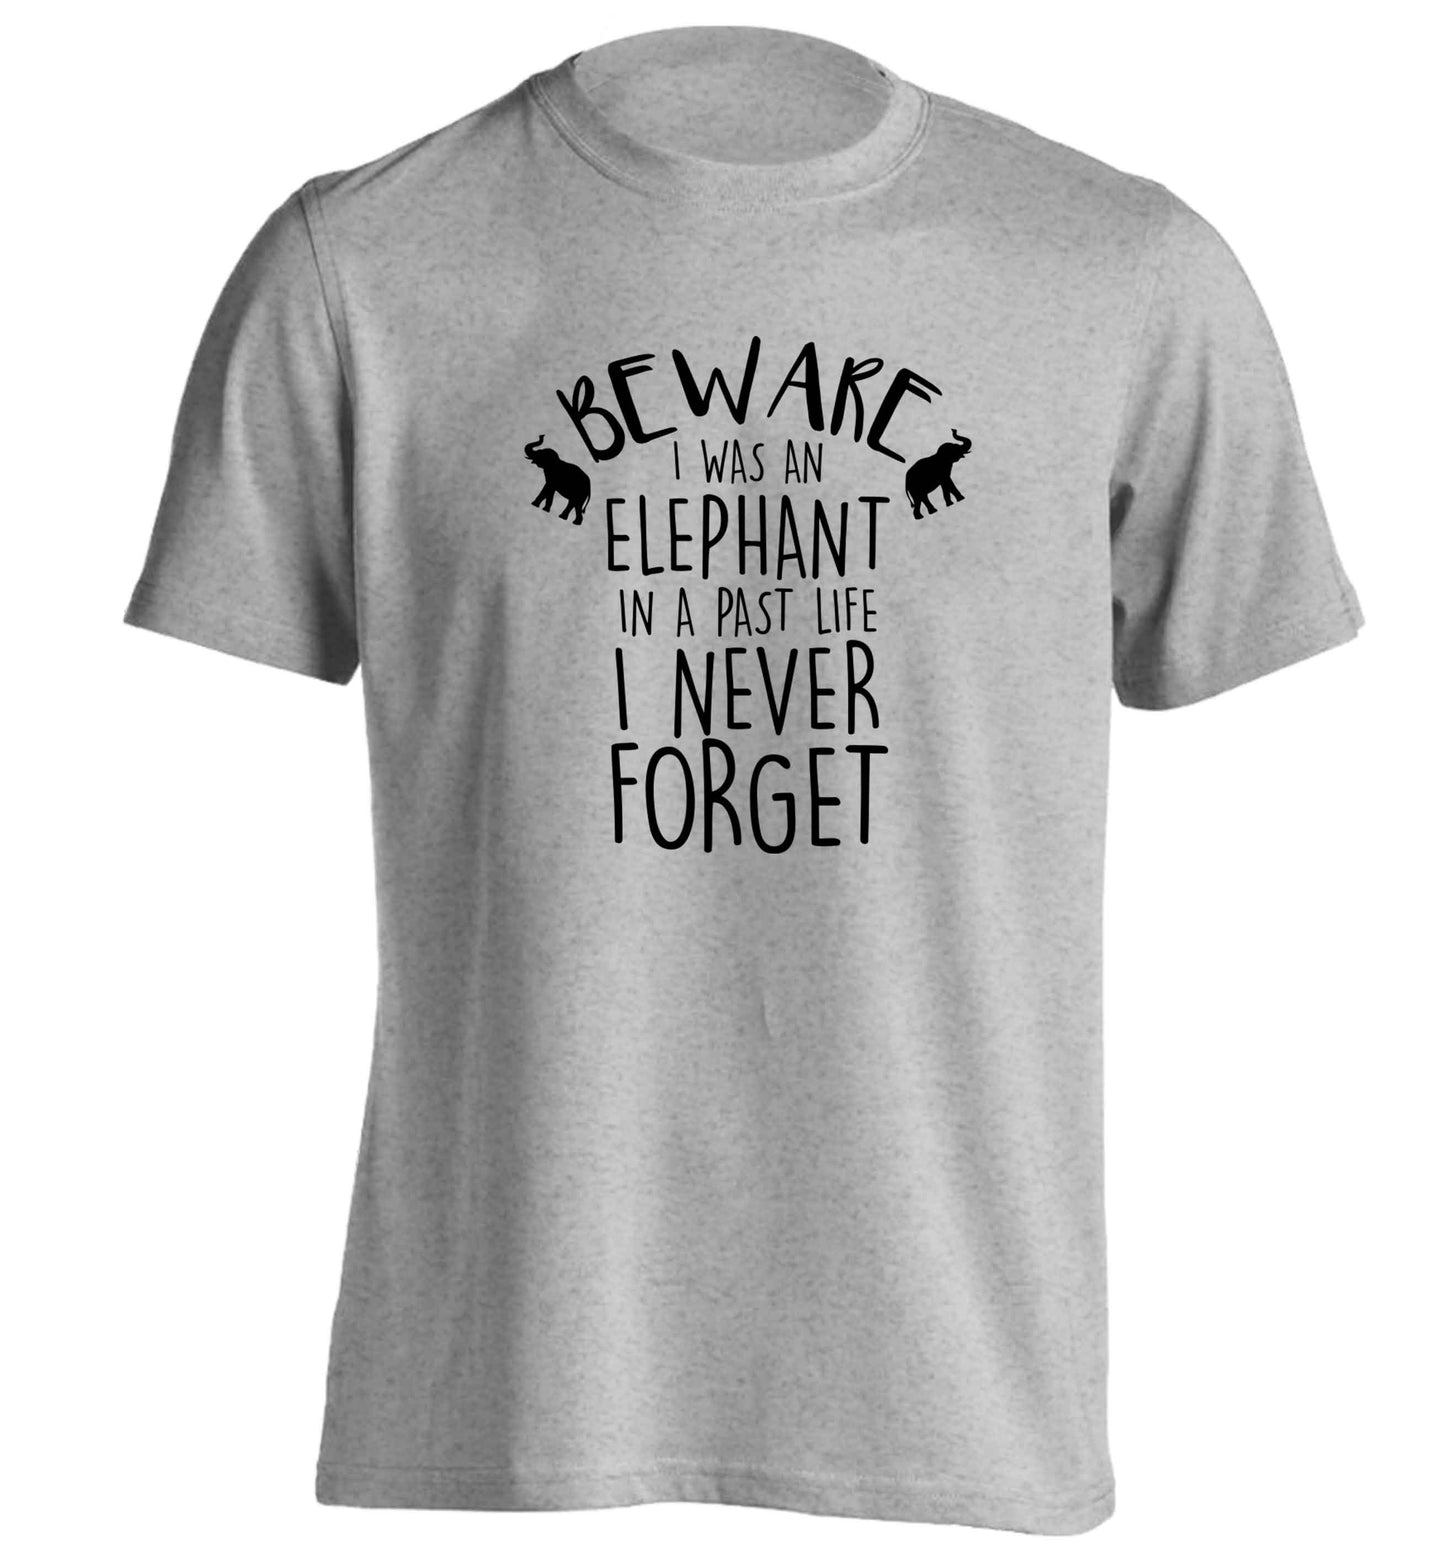 Beware I was an elephant in my past life I never forget adults unisex grey Tshirt 2XL